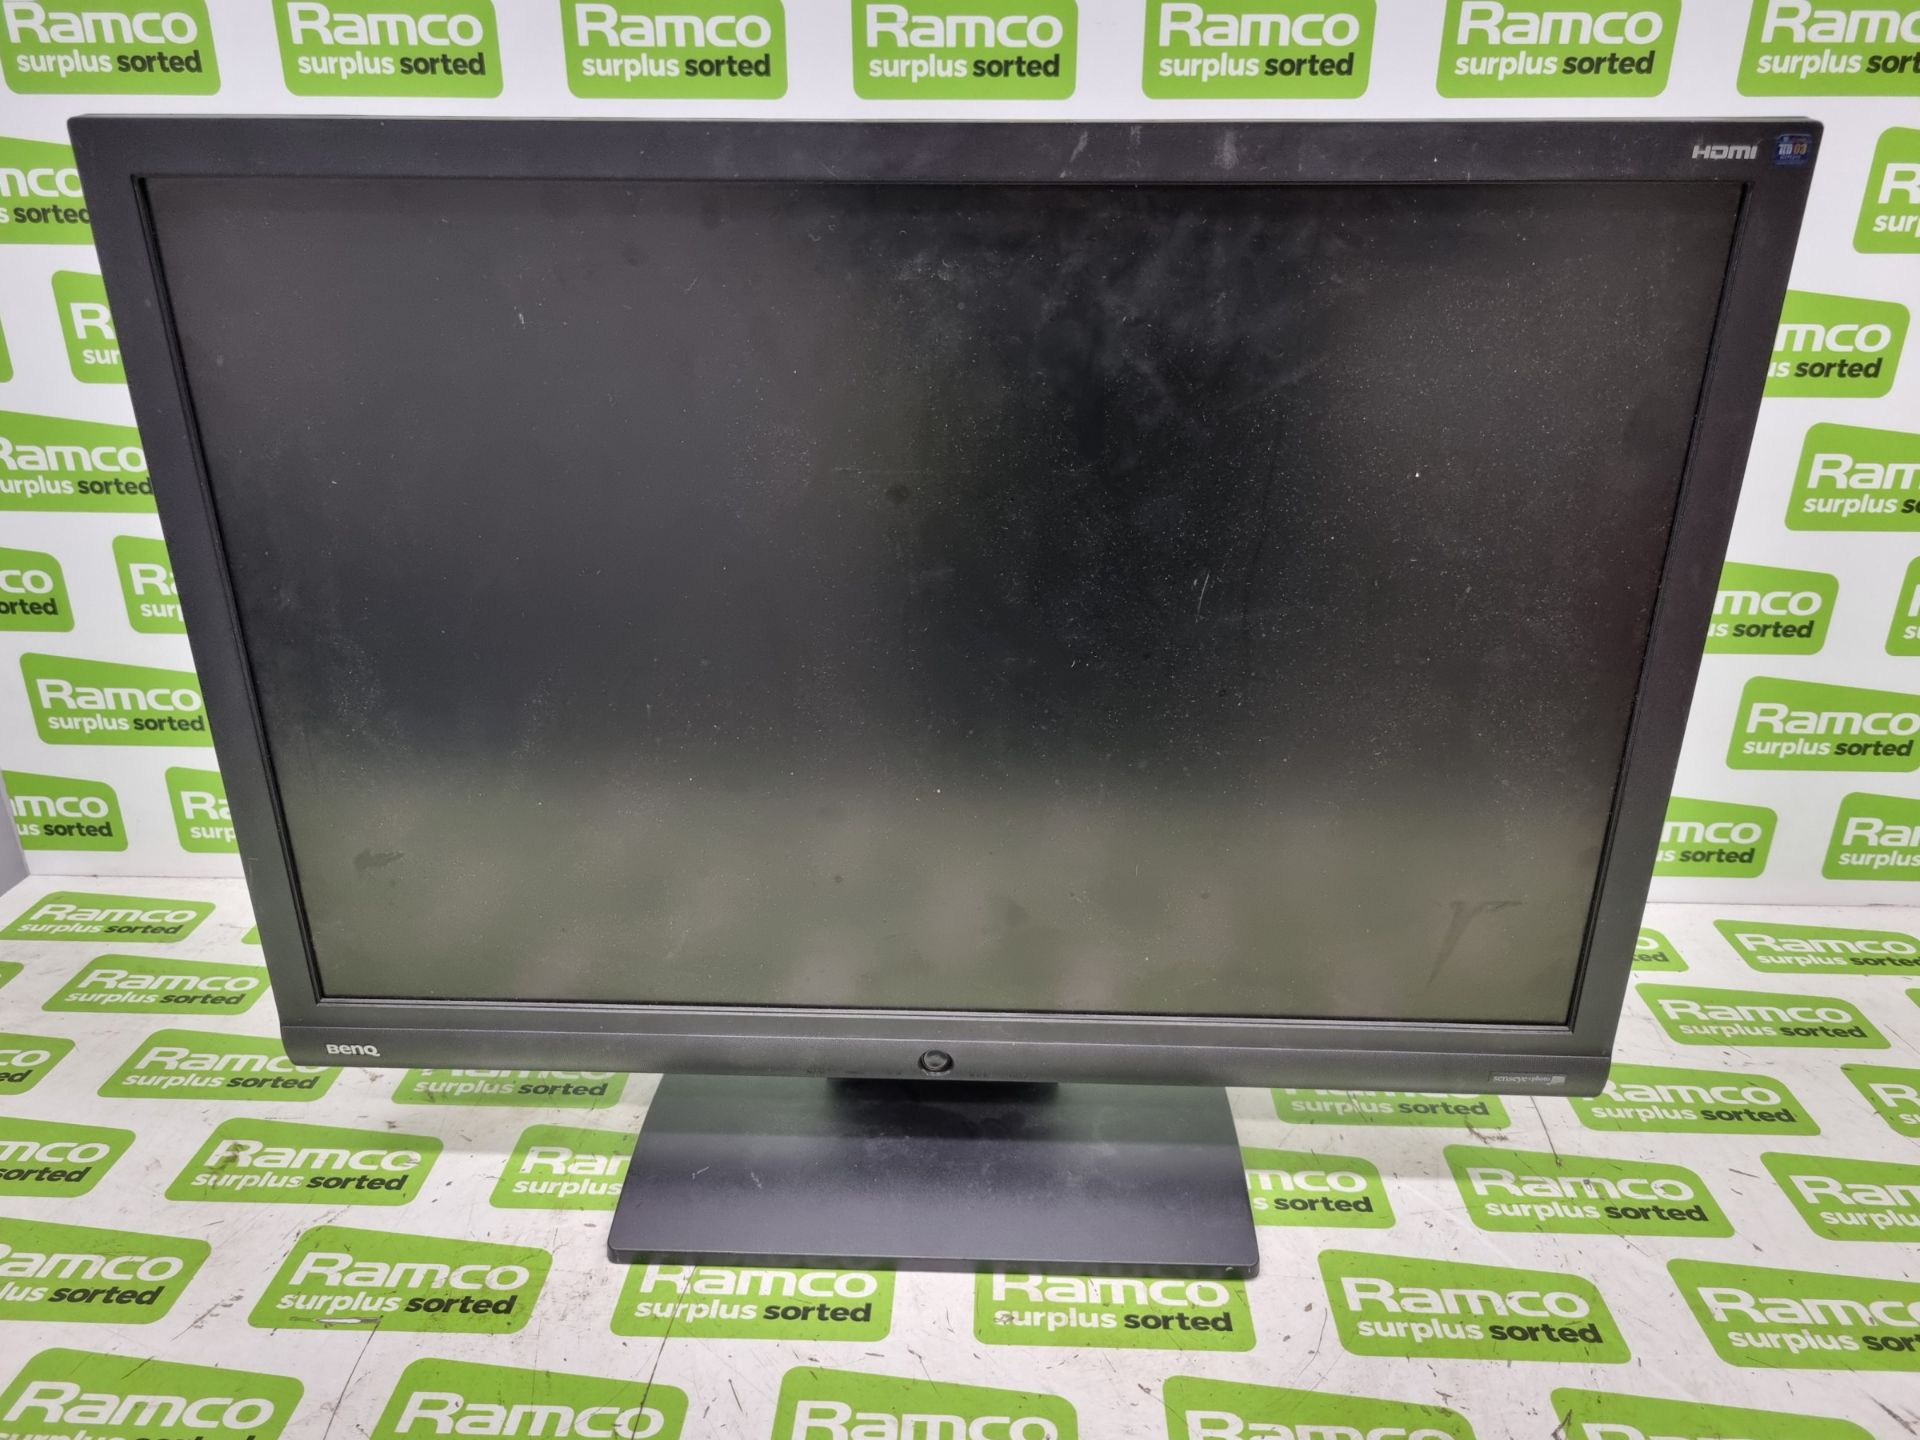 BenQ G2400W 24 inch LCD monitor with flight case